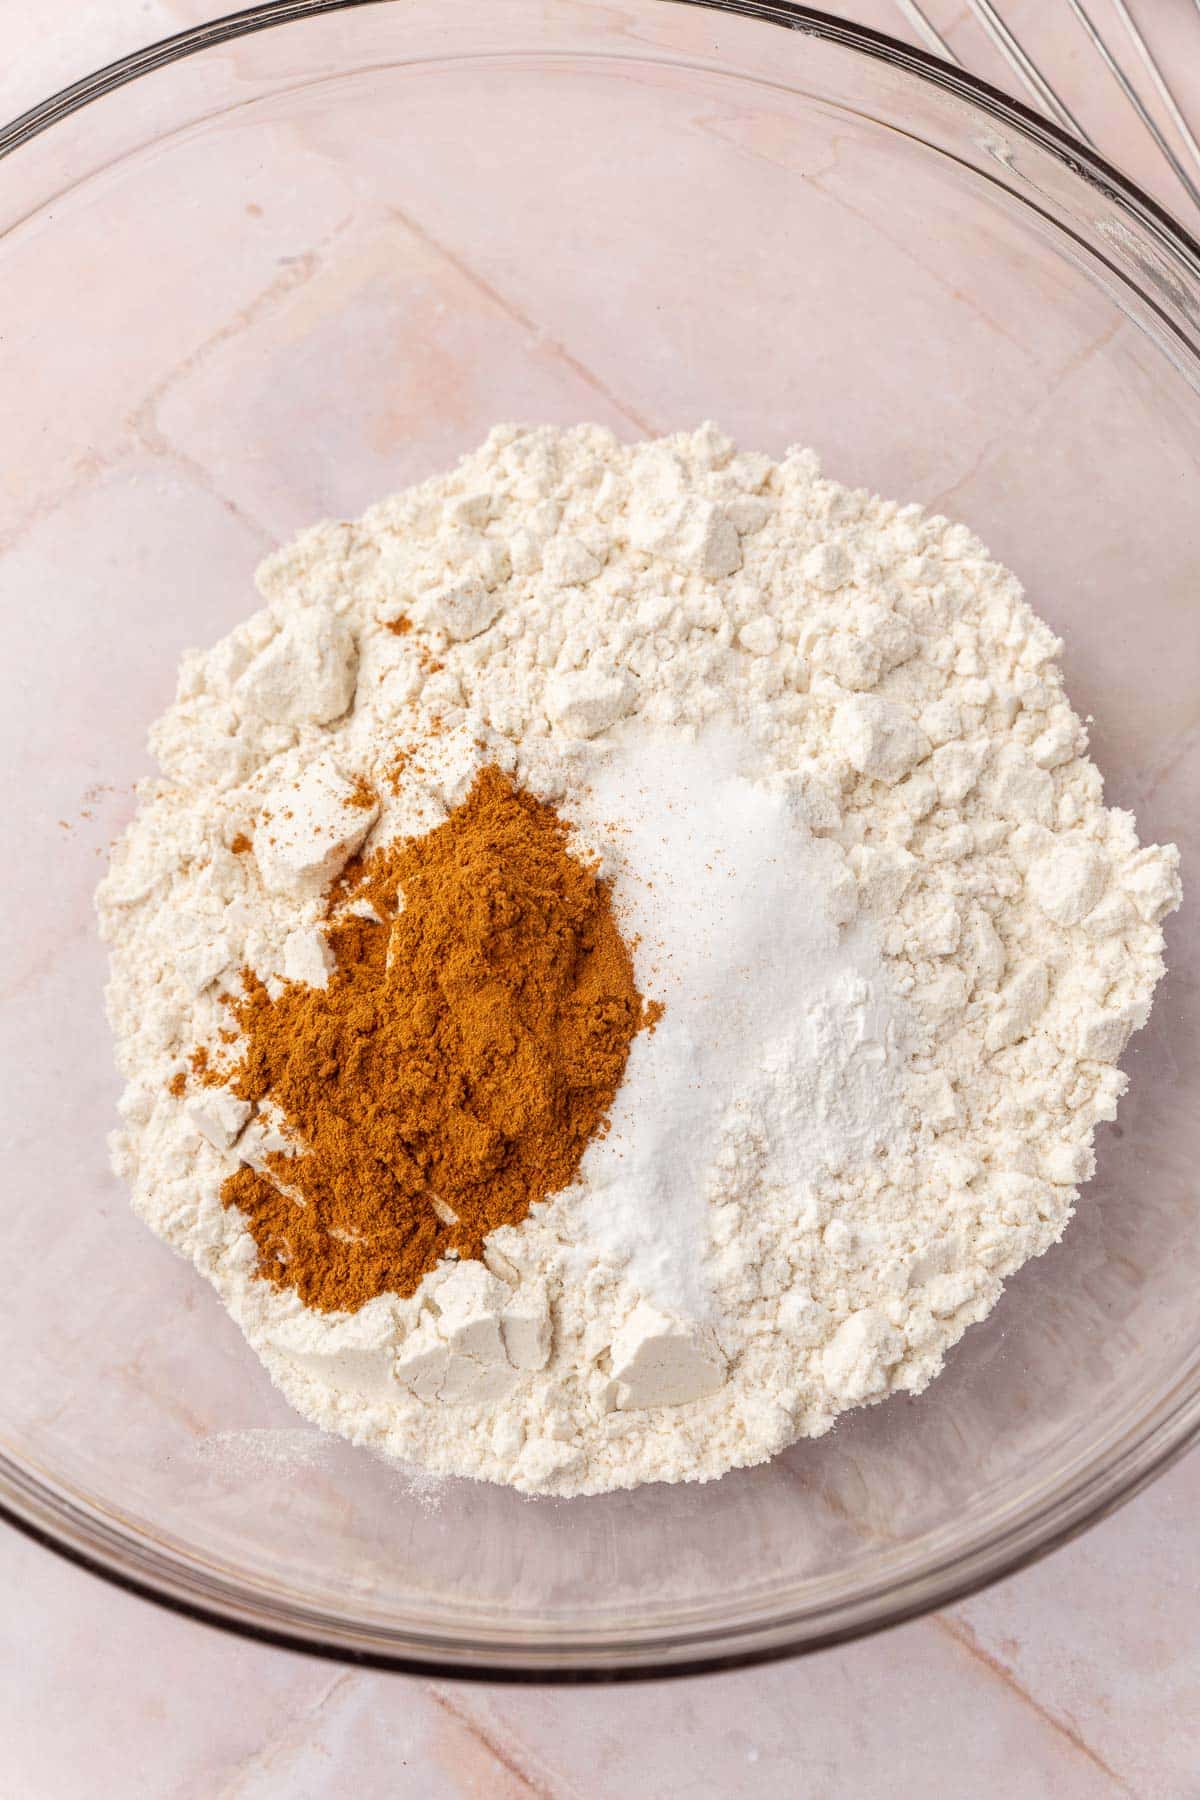 A glass mixing bowl with gluten-free flour, ground cinnamon, salt, baking soda and baking powder before whisking together.